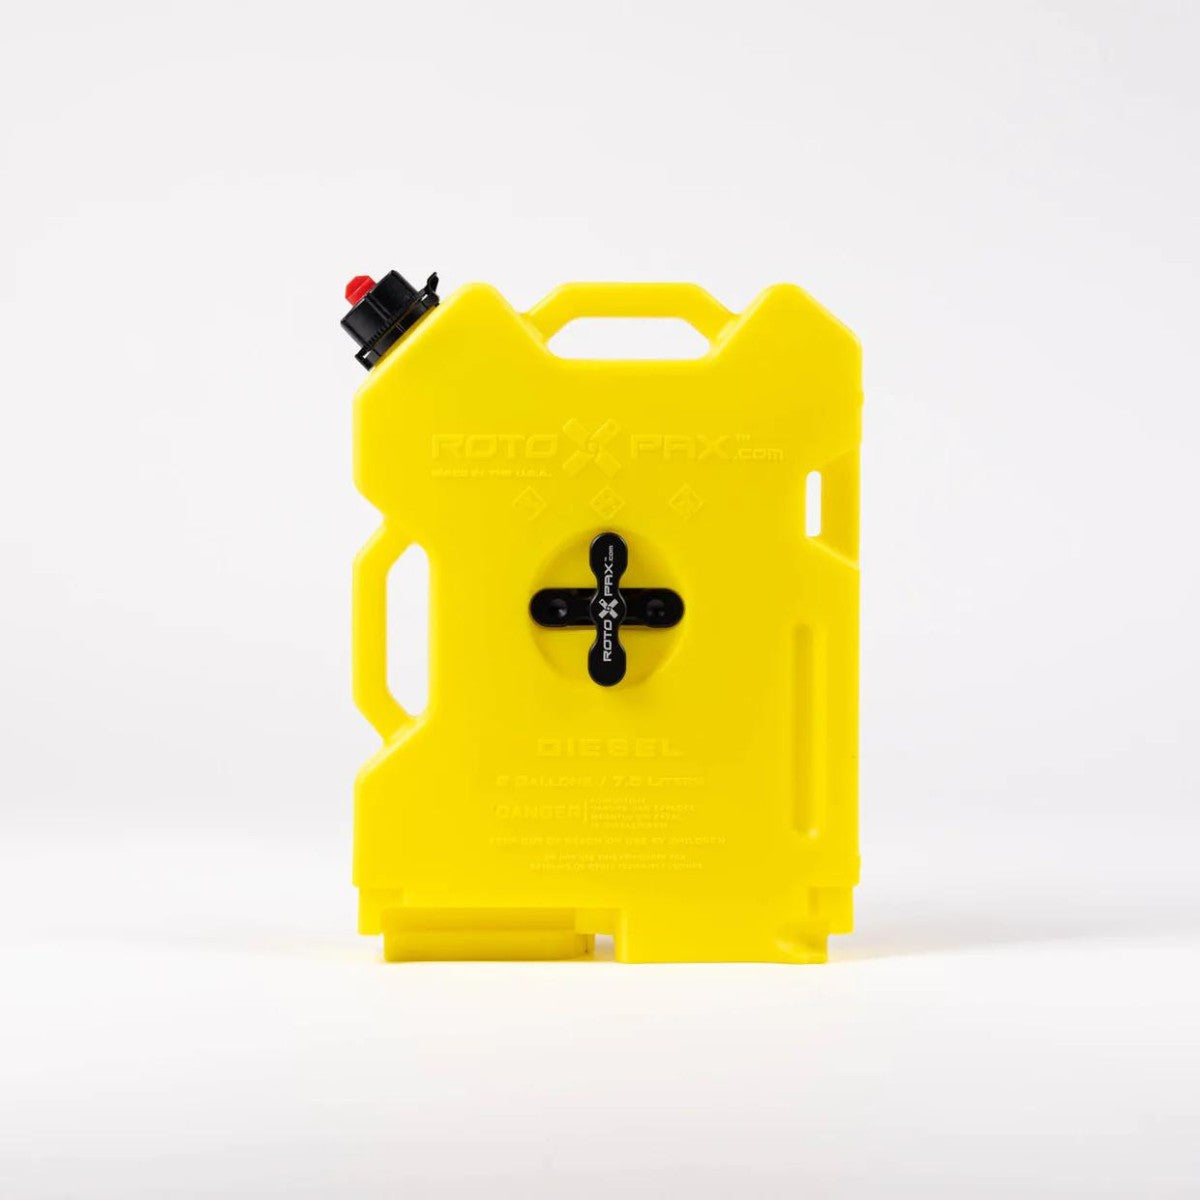 RotoPax RX-2D 2 Gallon Diesel Container - Yellow